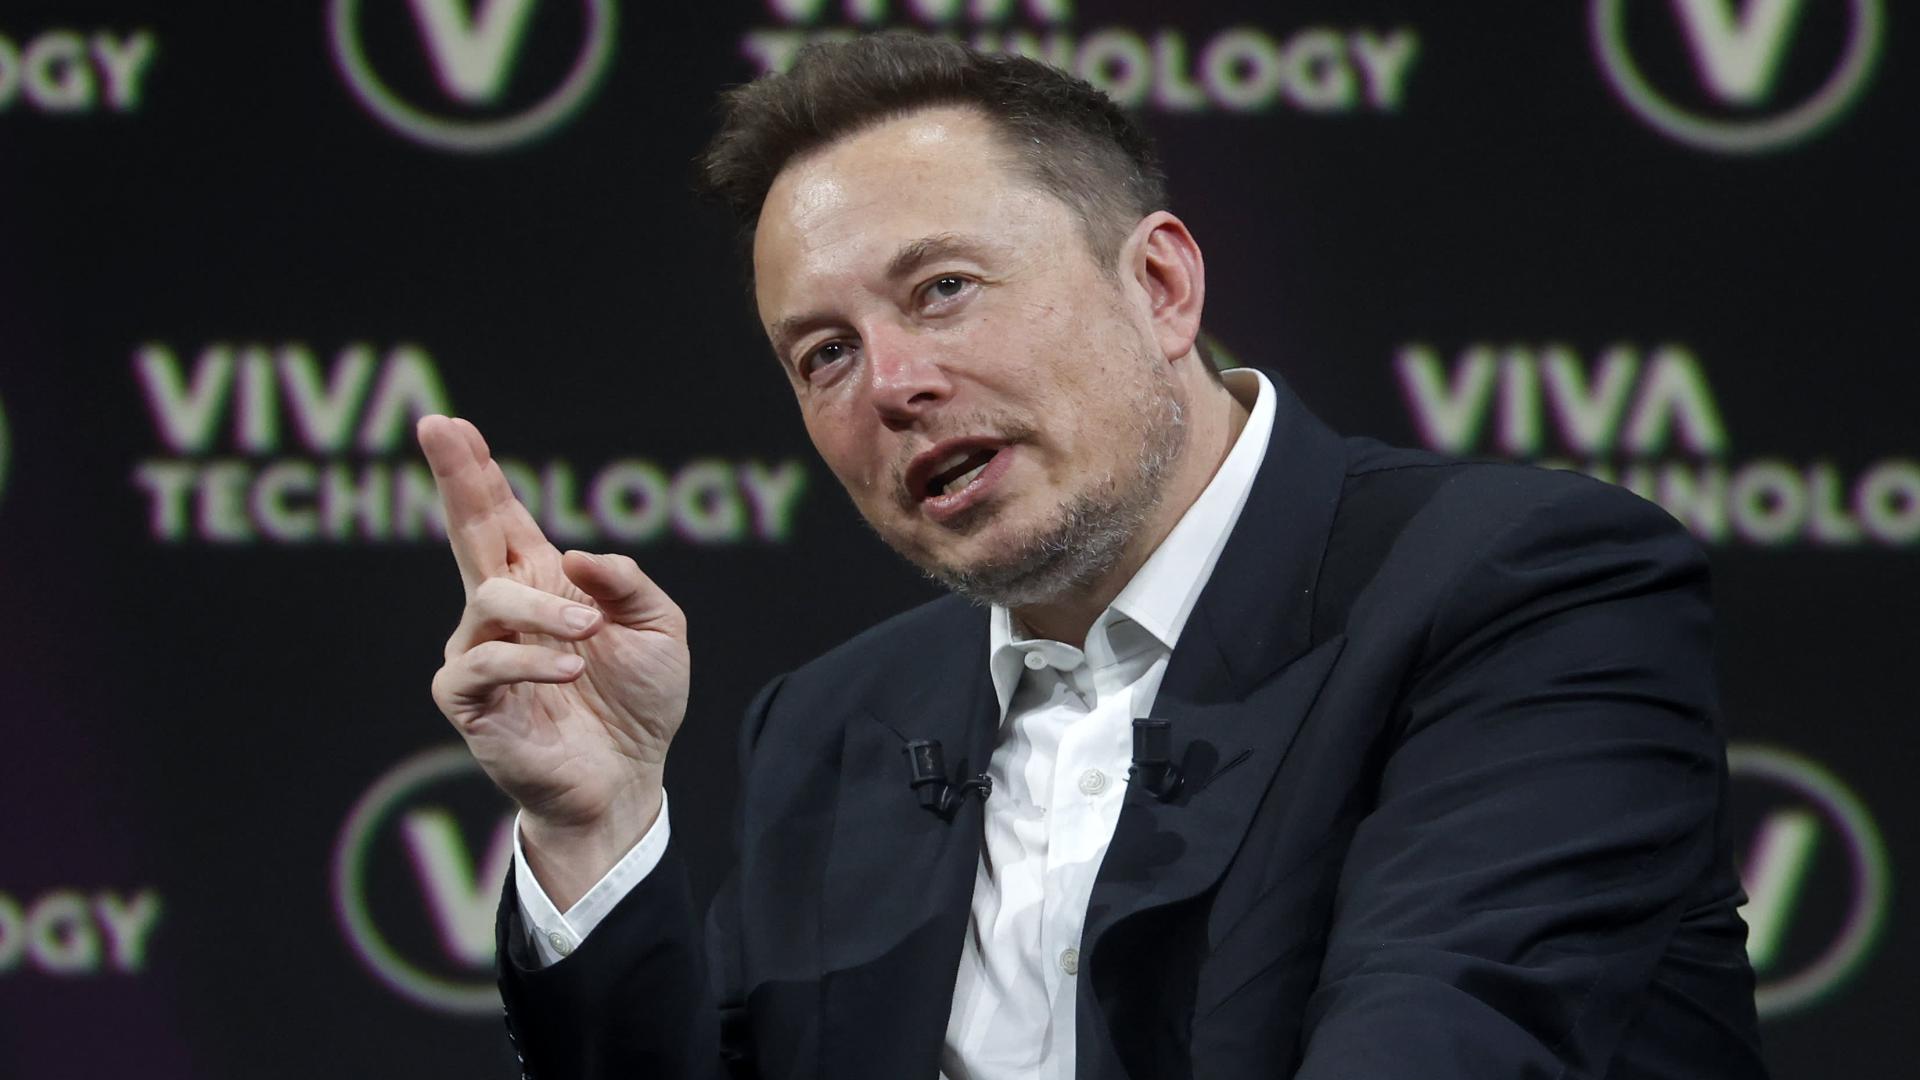 Elon Musk says Tesla's market cap is directly tied to whether it solves autonomous driving